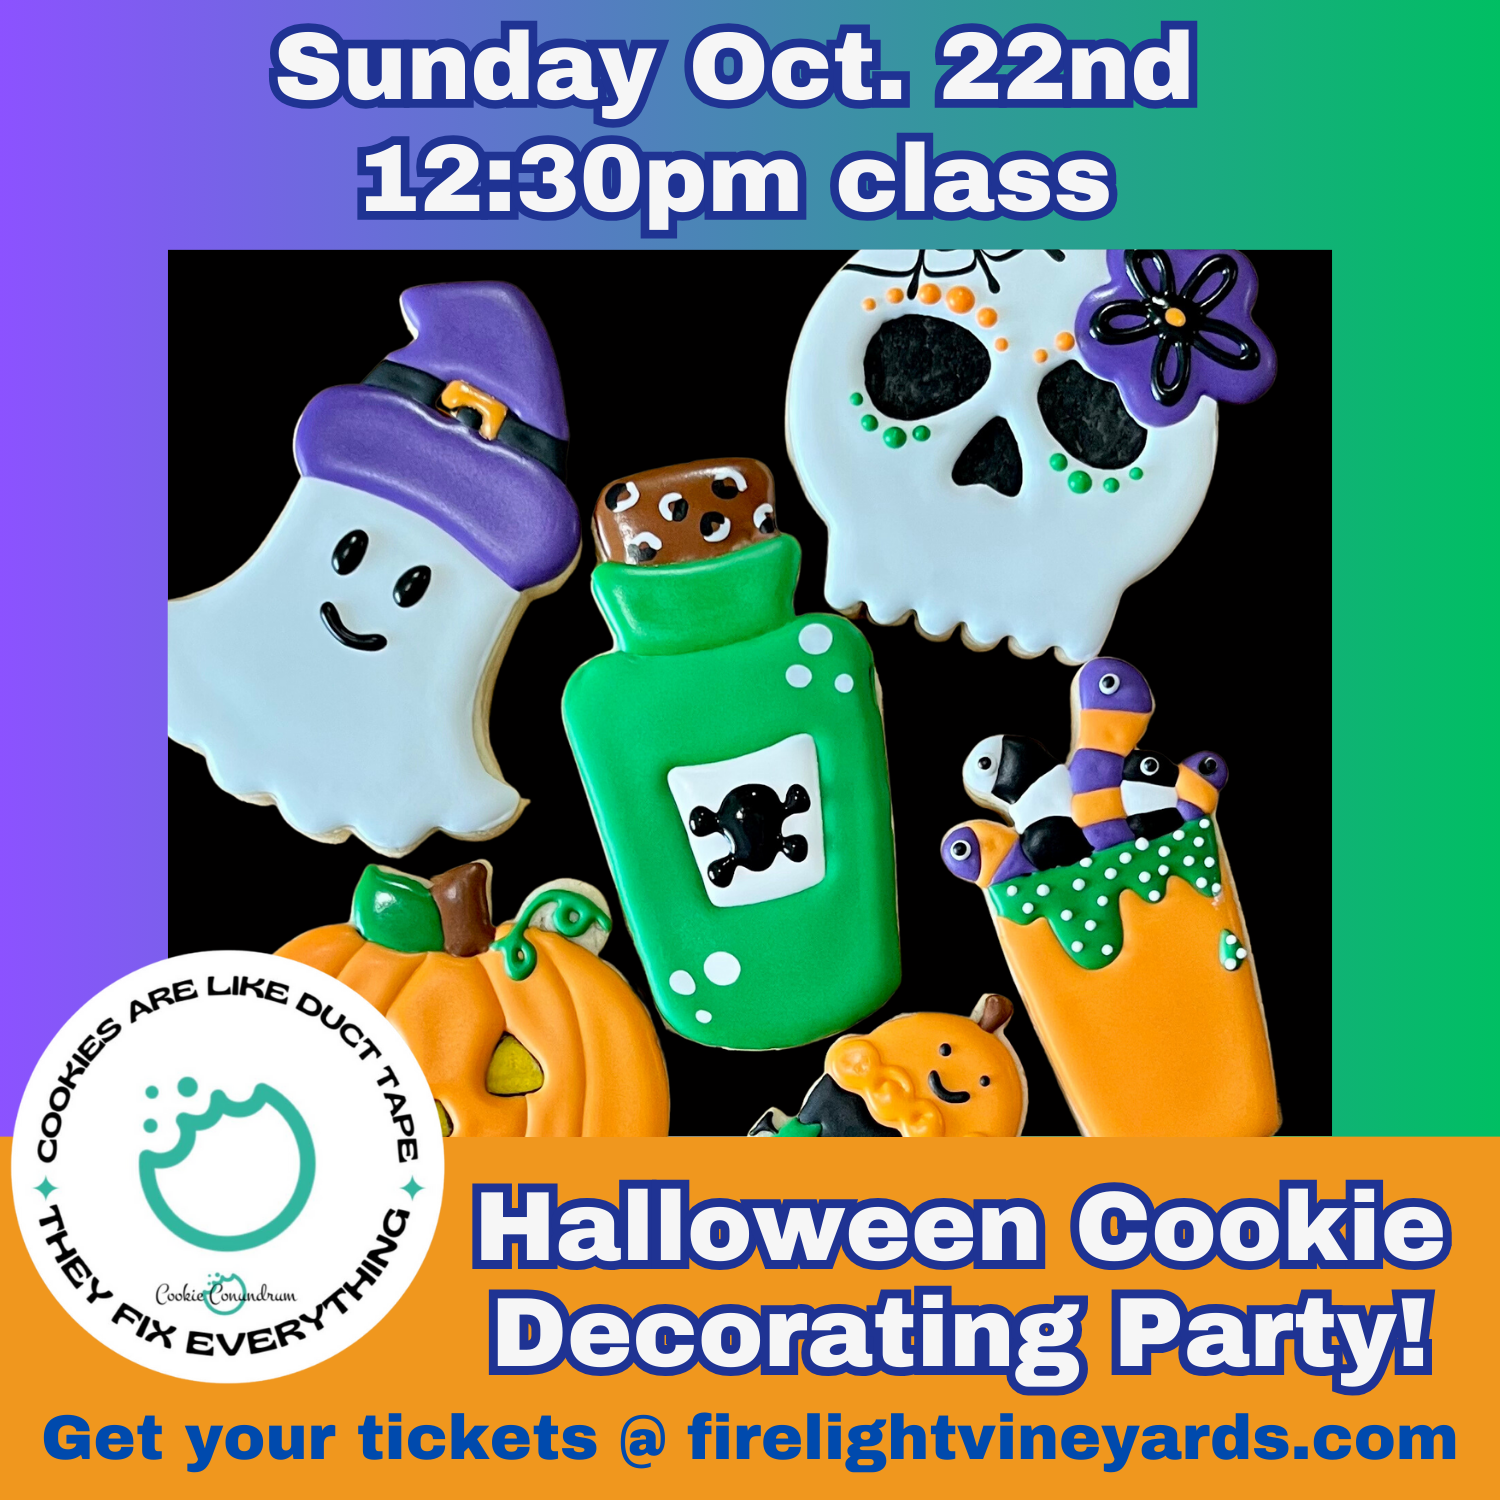 Product Image for Cookie Decorating Party 12:30pm Start